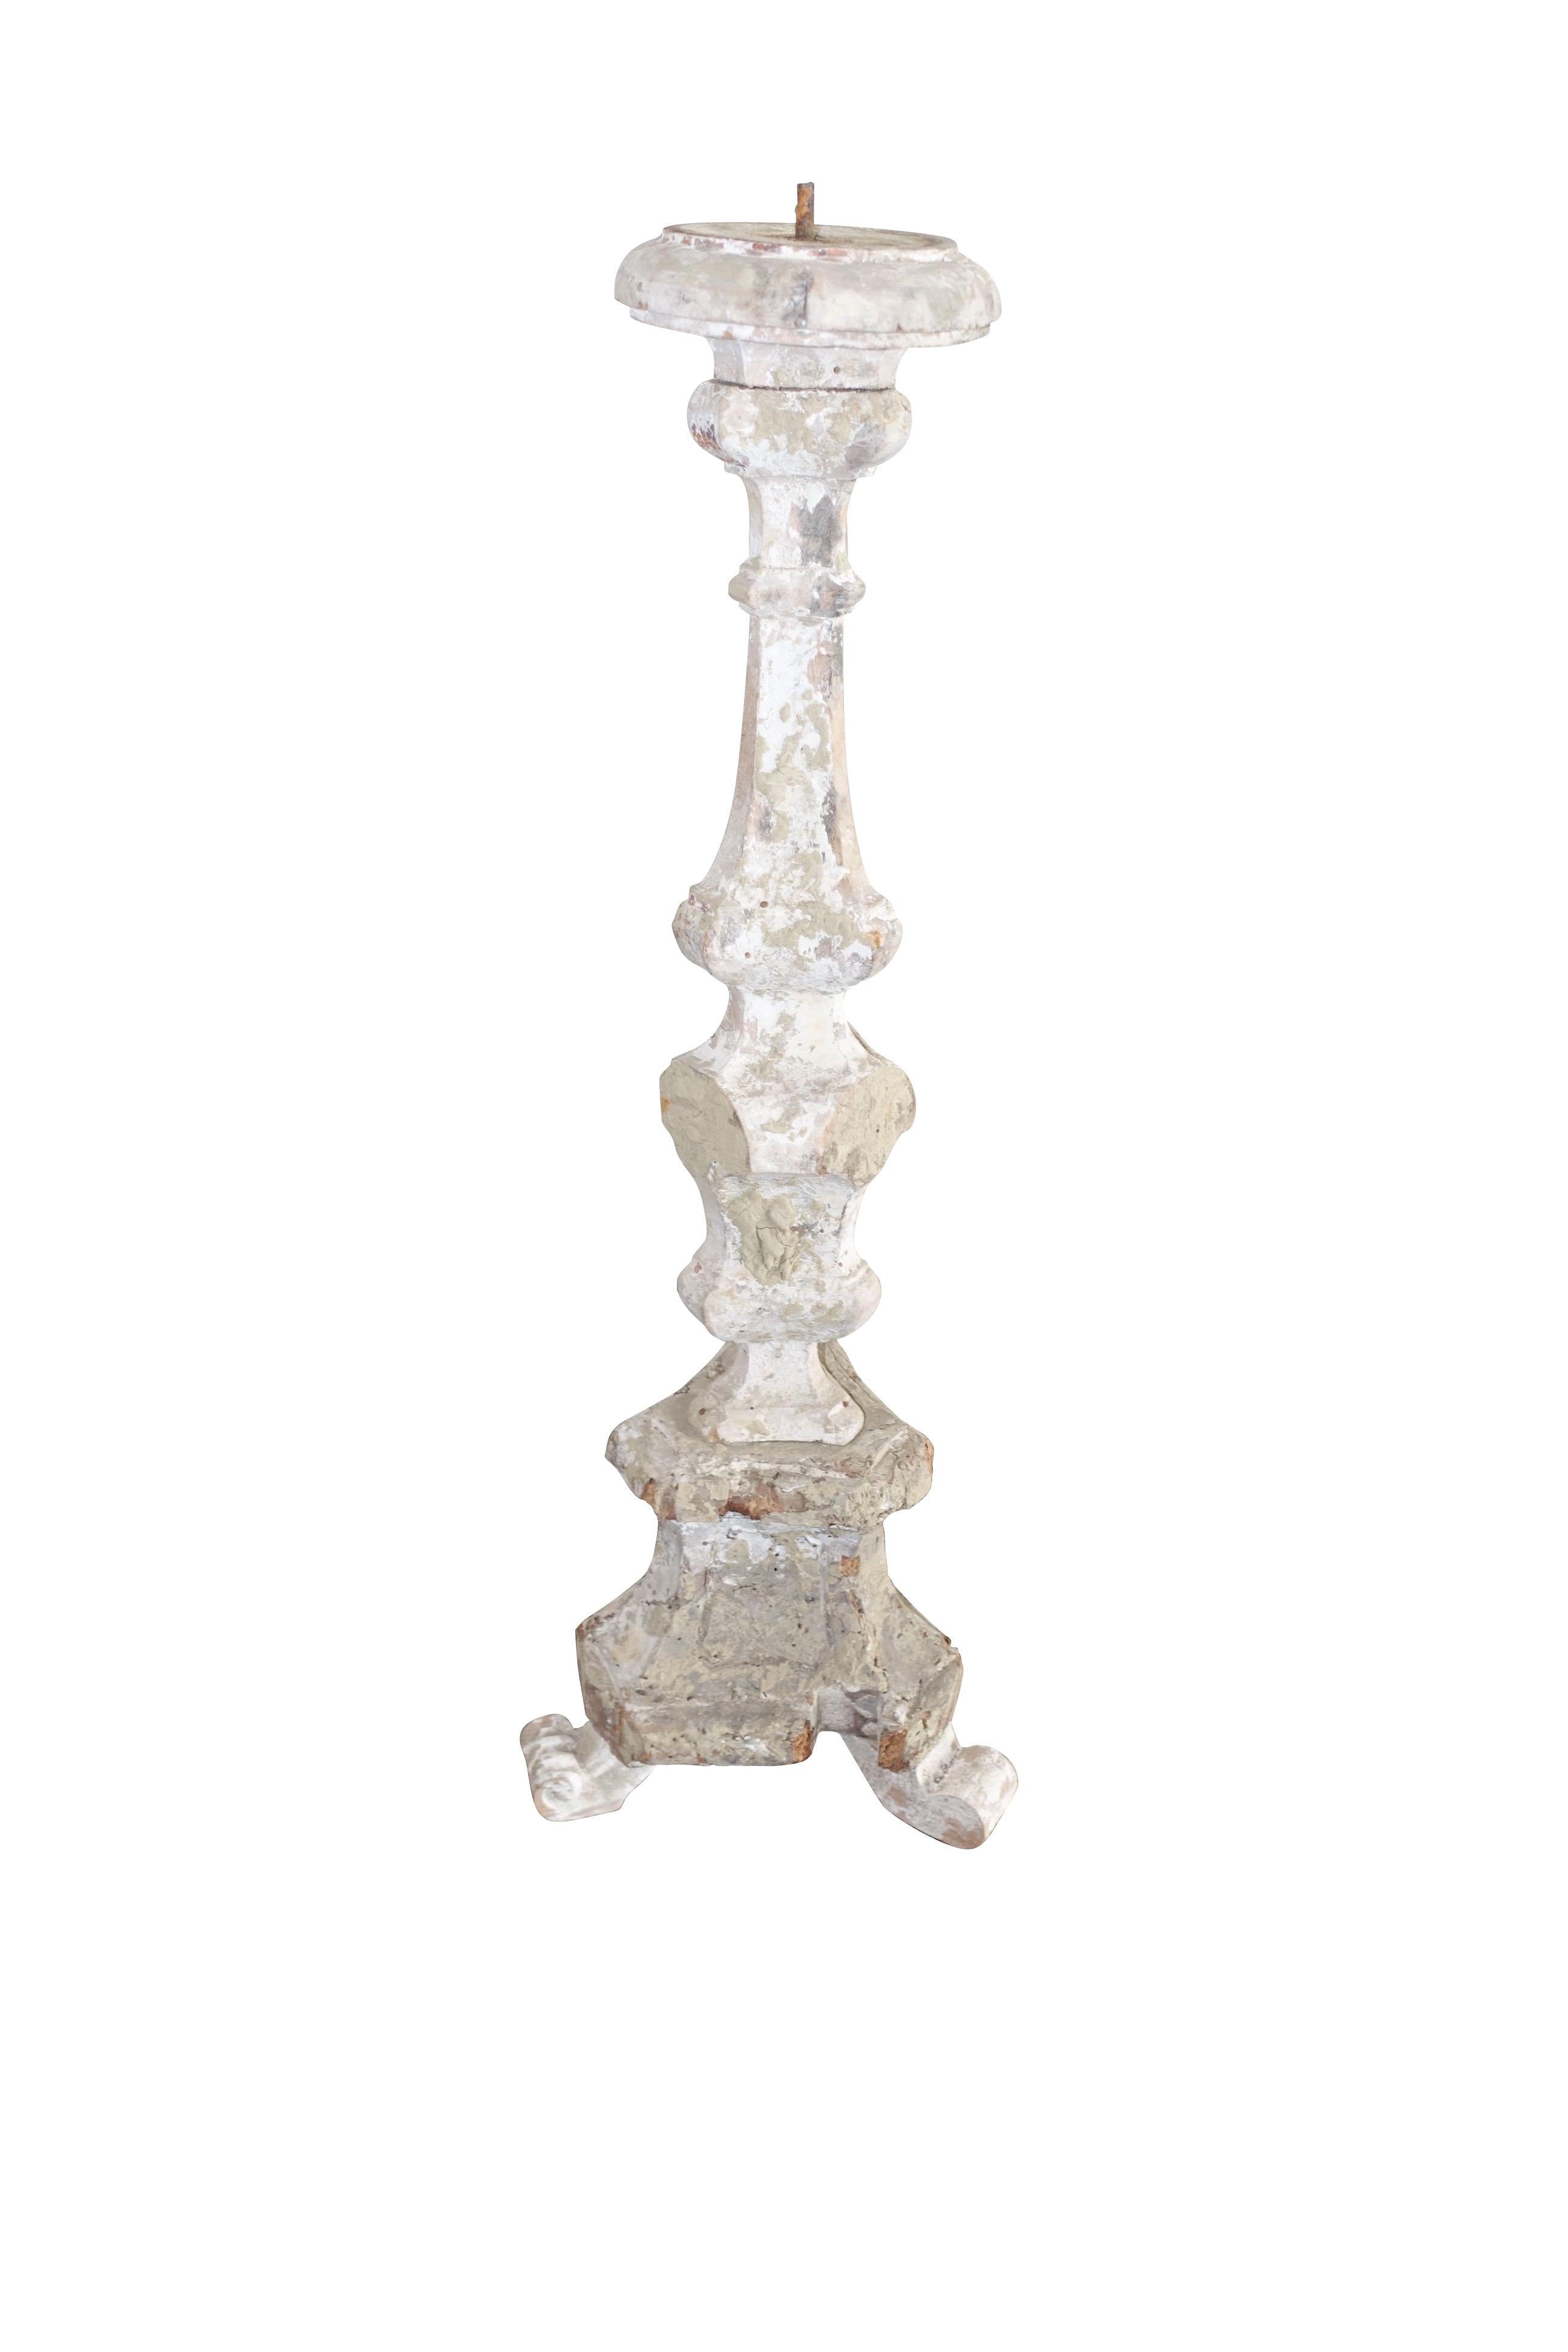 19th century Italian wooden hand carved candlestick originally housed on alters in cathedrals.
Originally painted white, the candlesticks now have a natural weathered patina. 
Three footed with two facing forward more decorative, as was the custom